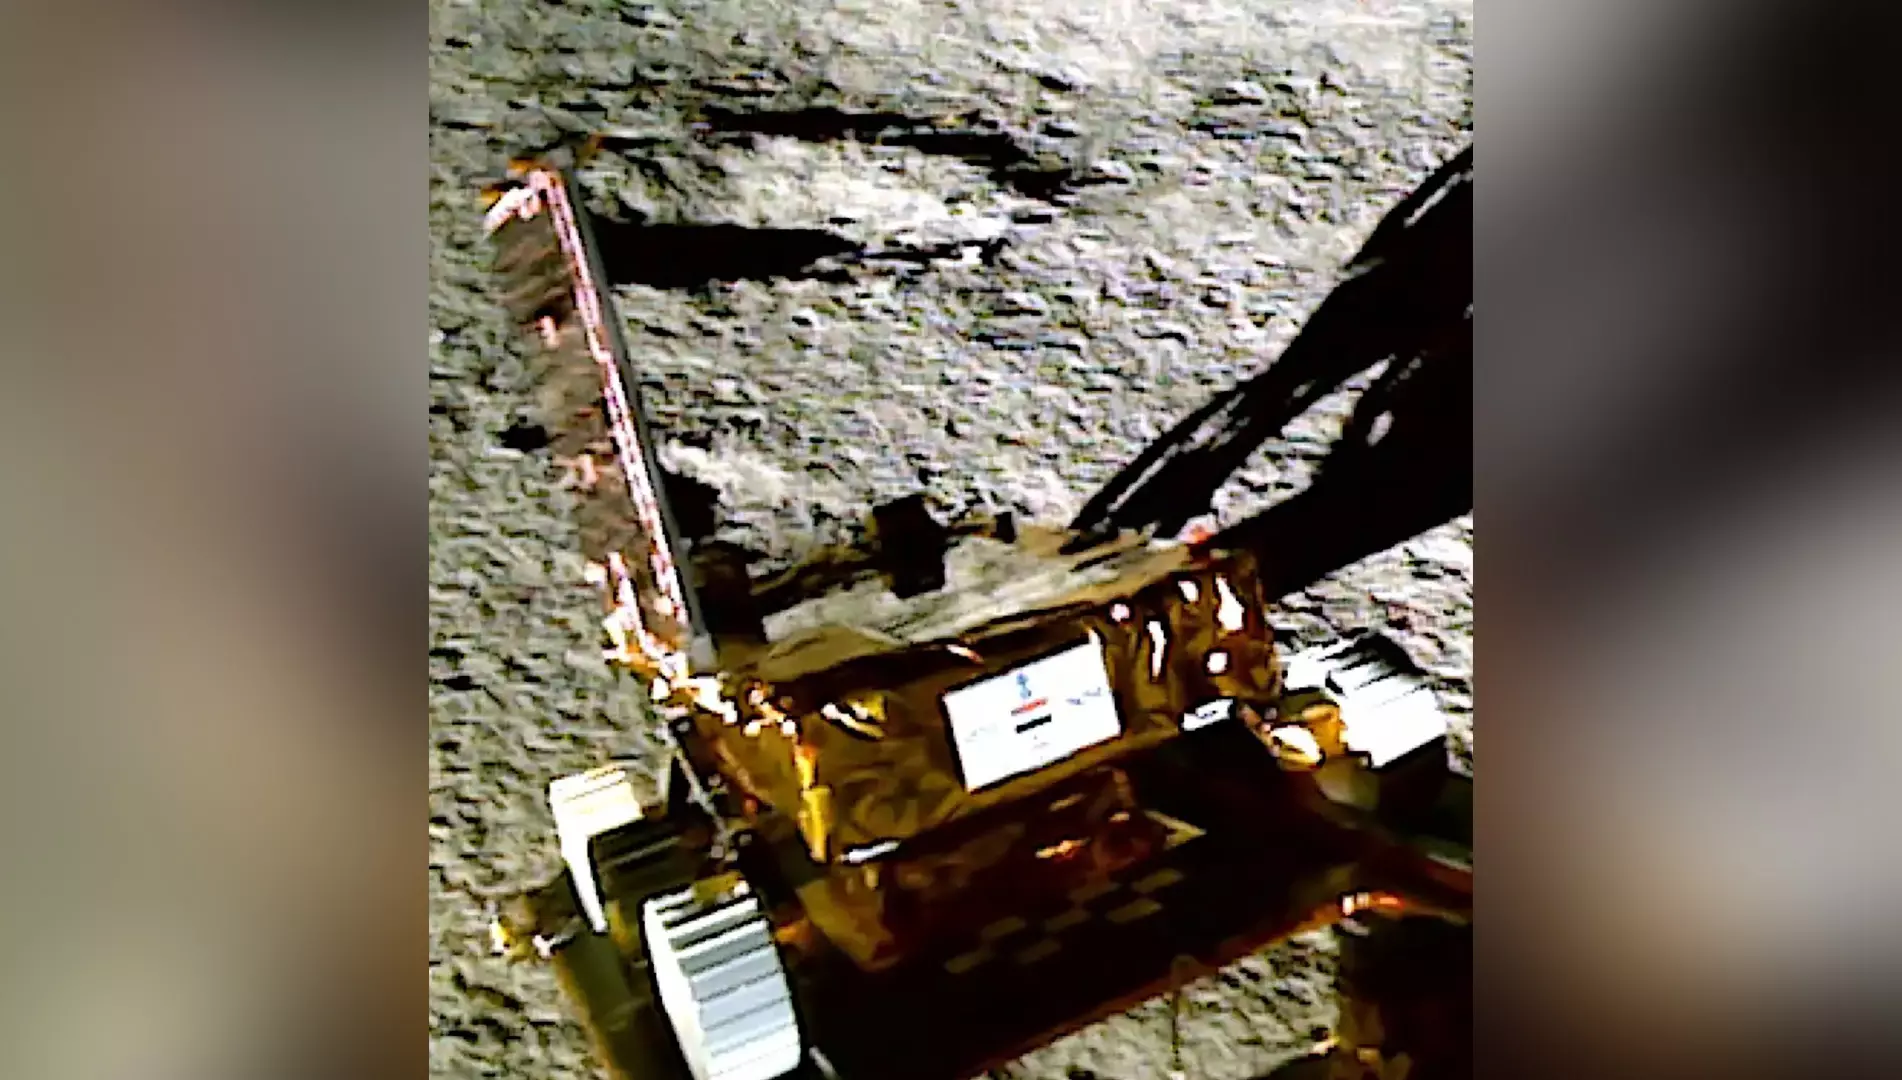 In this image taken by one of the LI Camera, the Pragyan is colourful, but the lunar surface appears black and white.